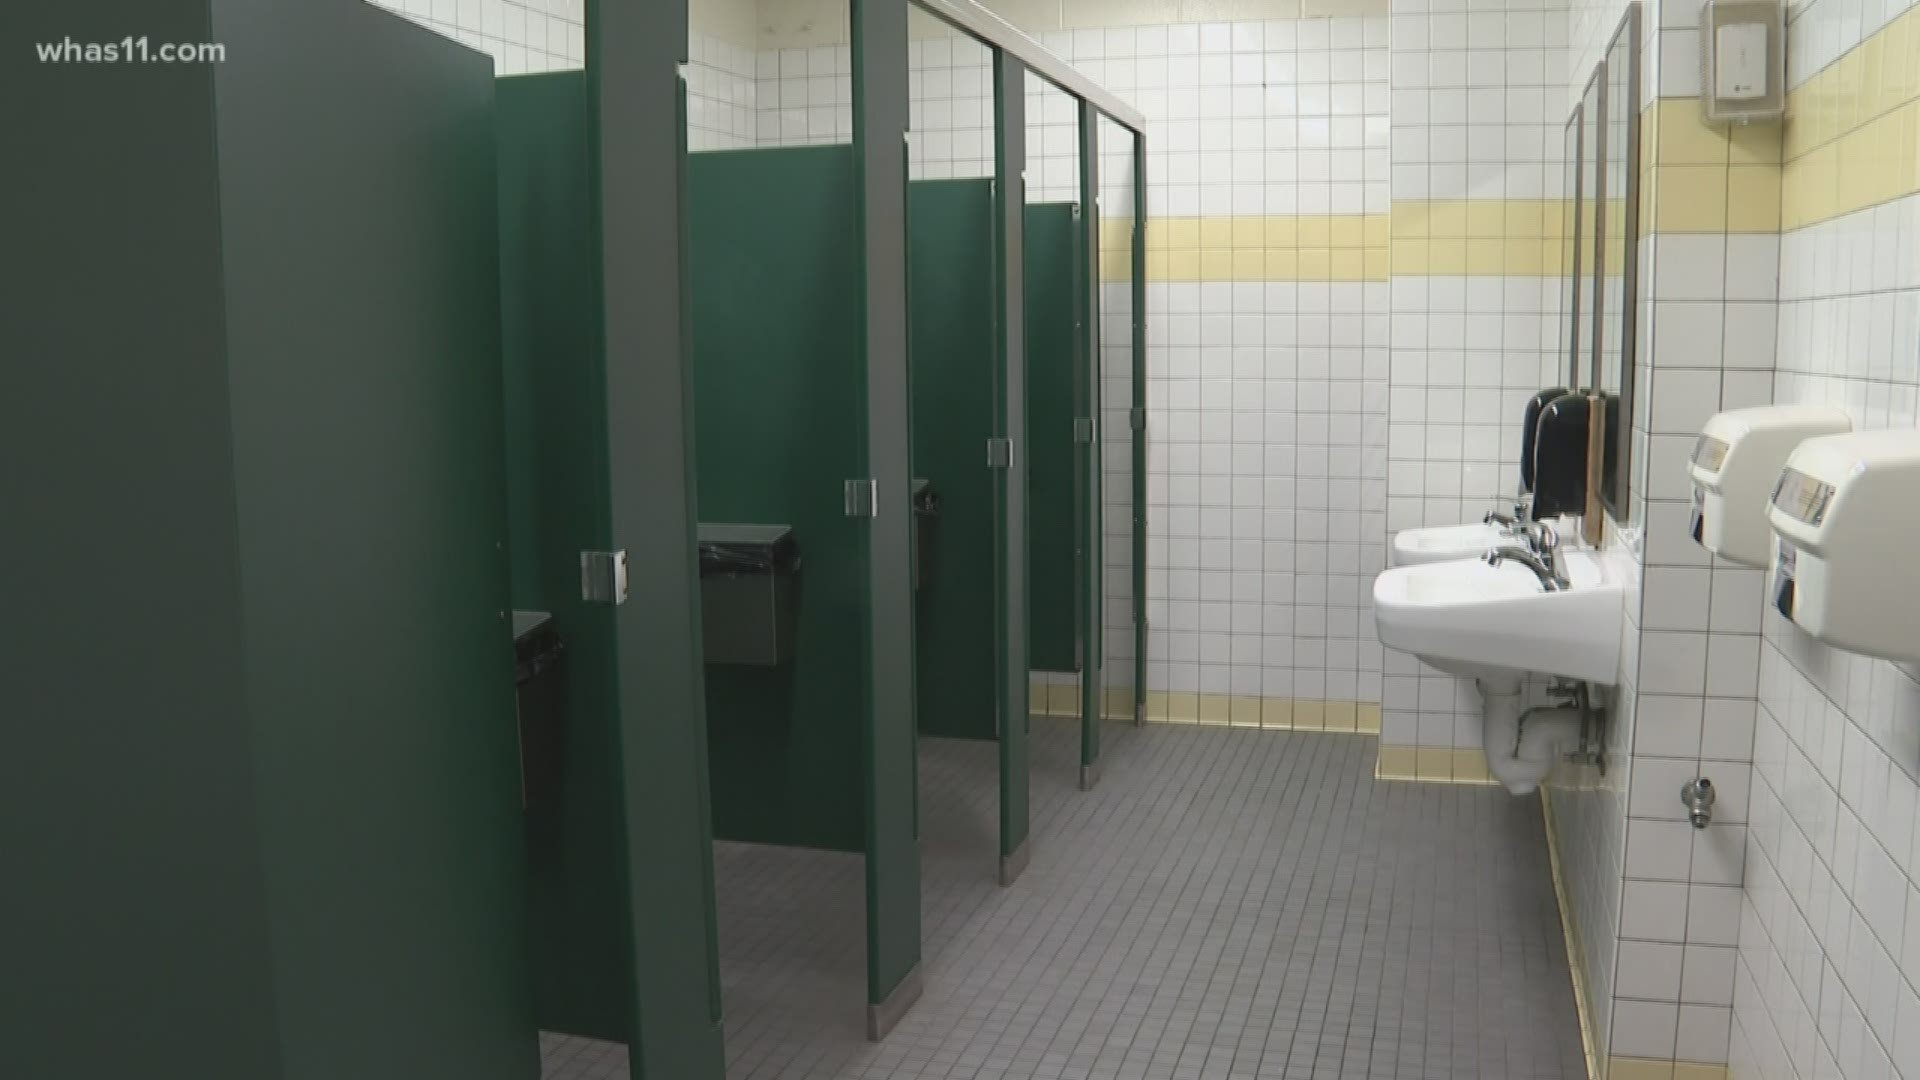 North Bullitt High School bathroom policy meant to reduce smoking, vaping  and fighting incidents | whas11.com